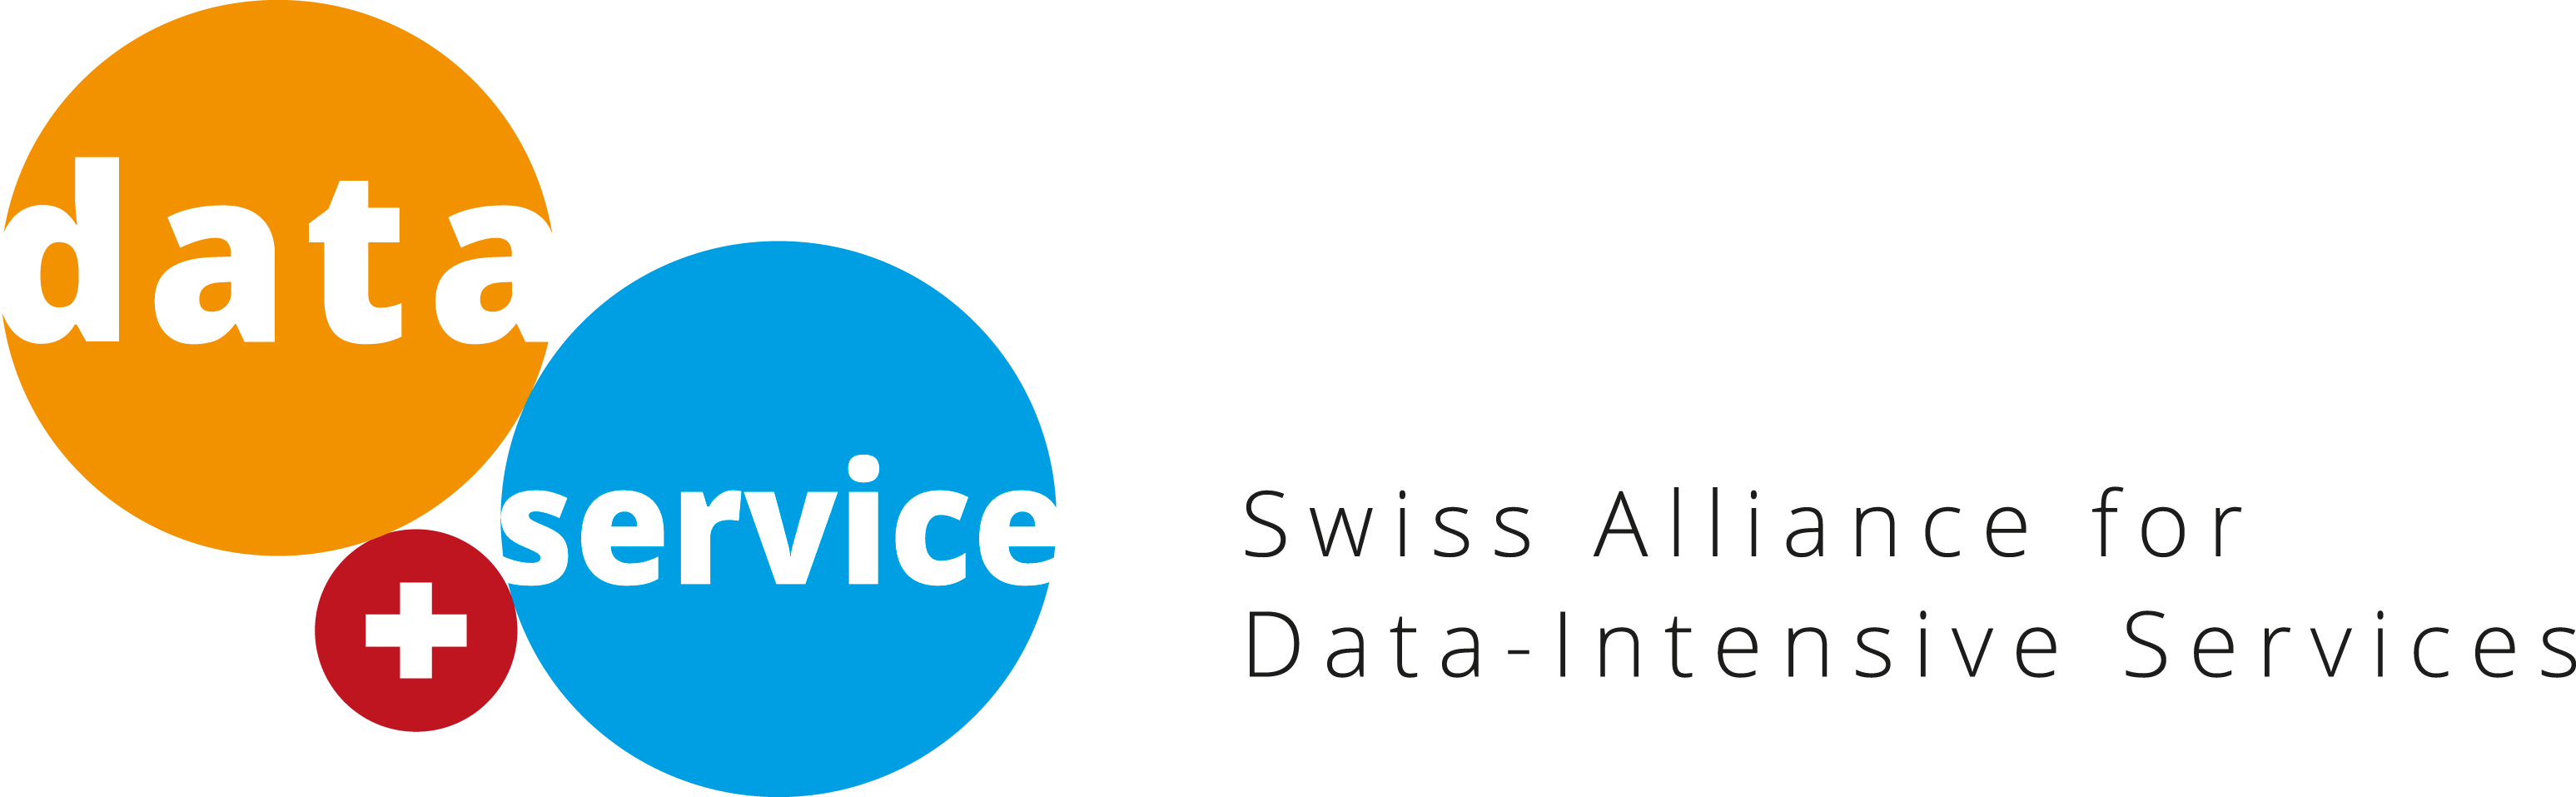 Swiss Alliance for Data-Intensive Services